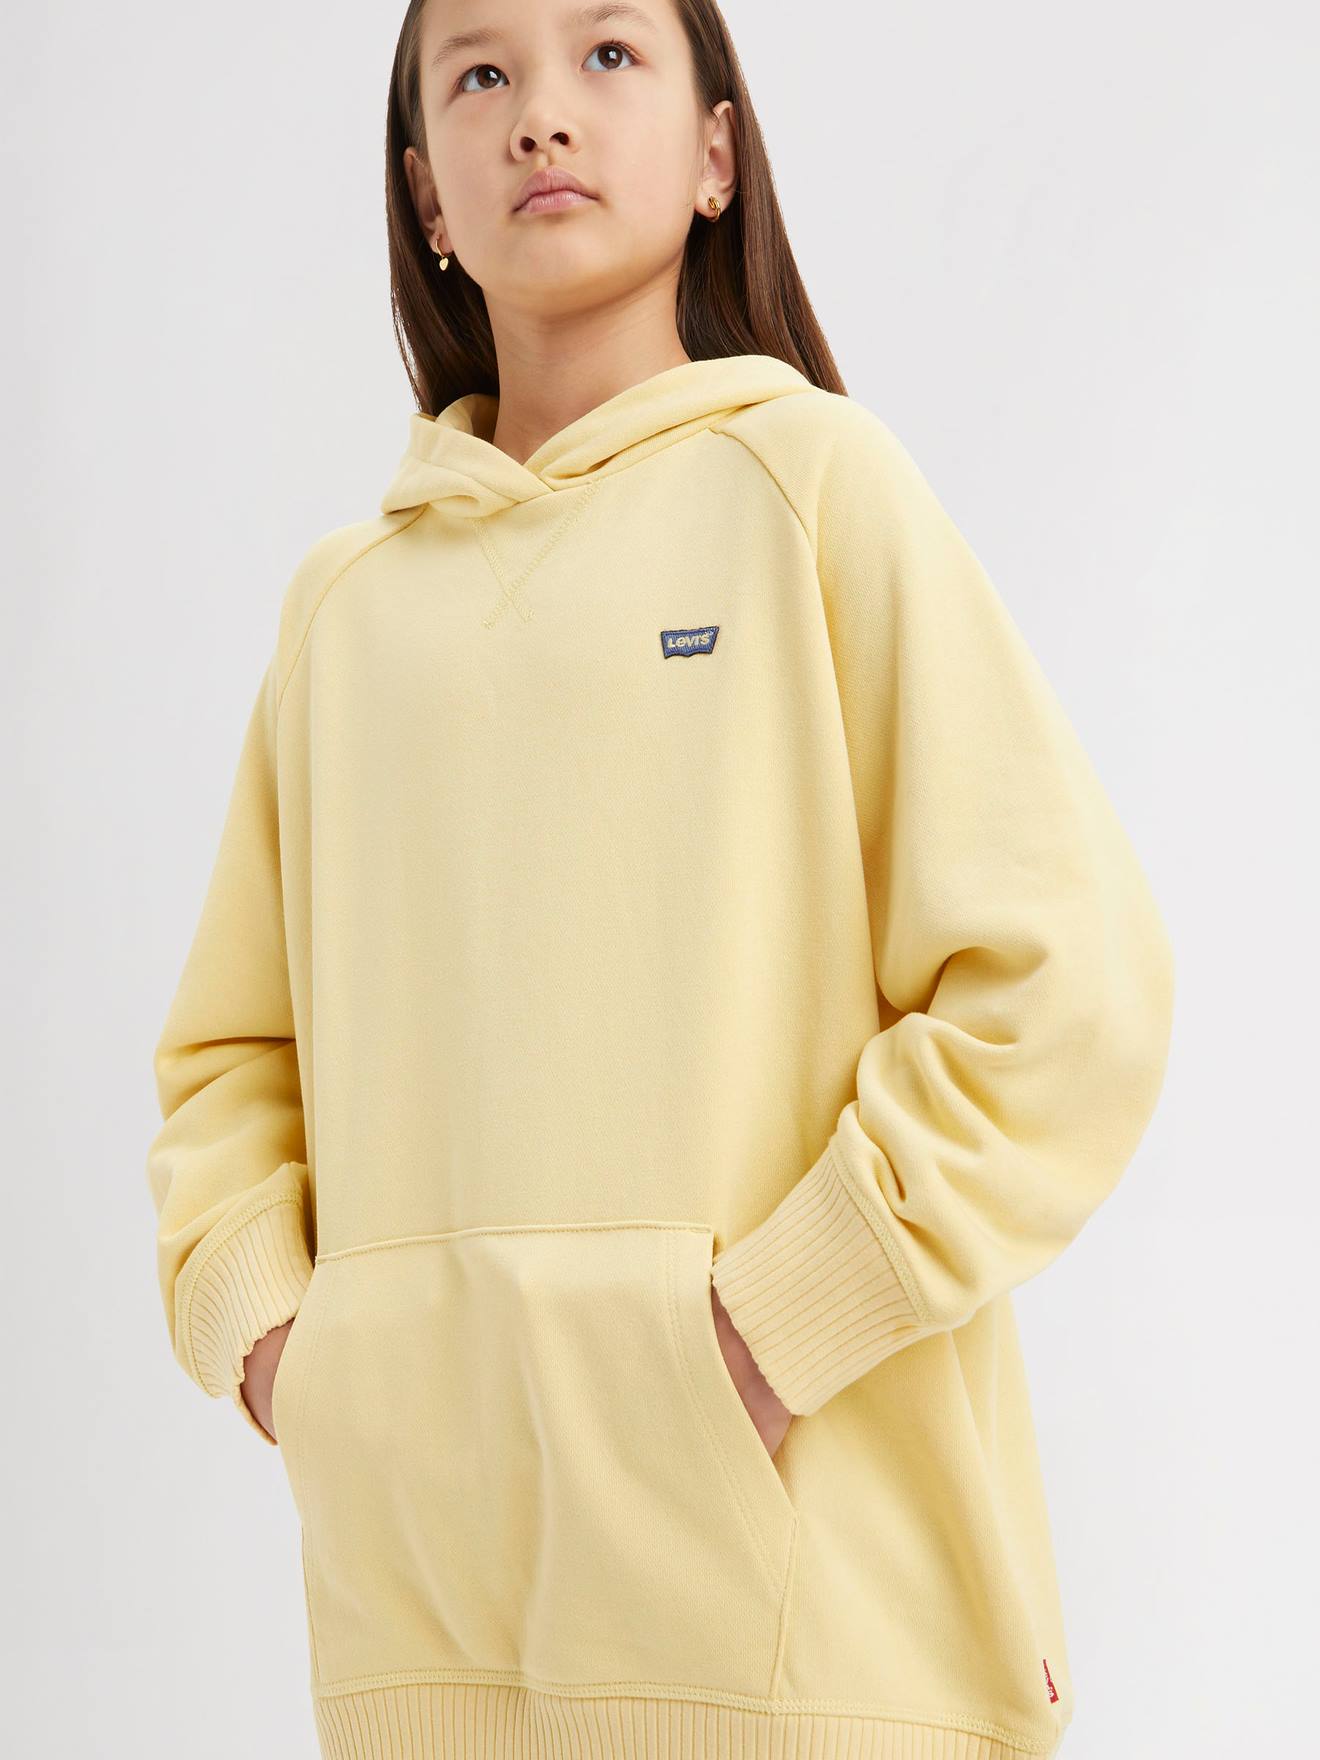 Hooded Sweatshirt by Levi’s(r) for Girls pale yellow